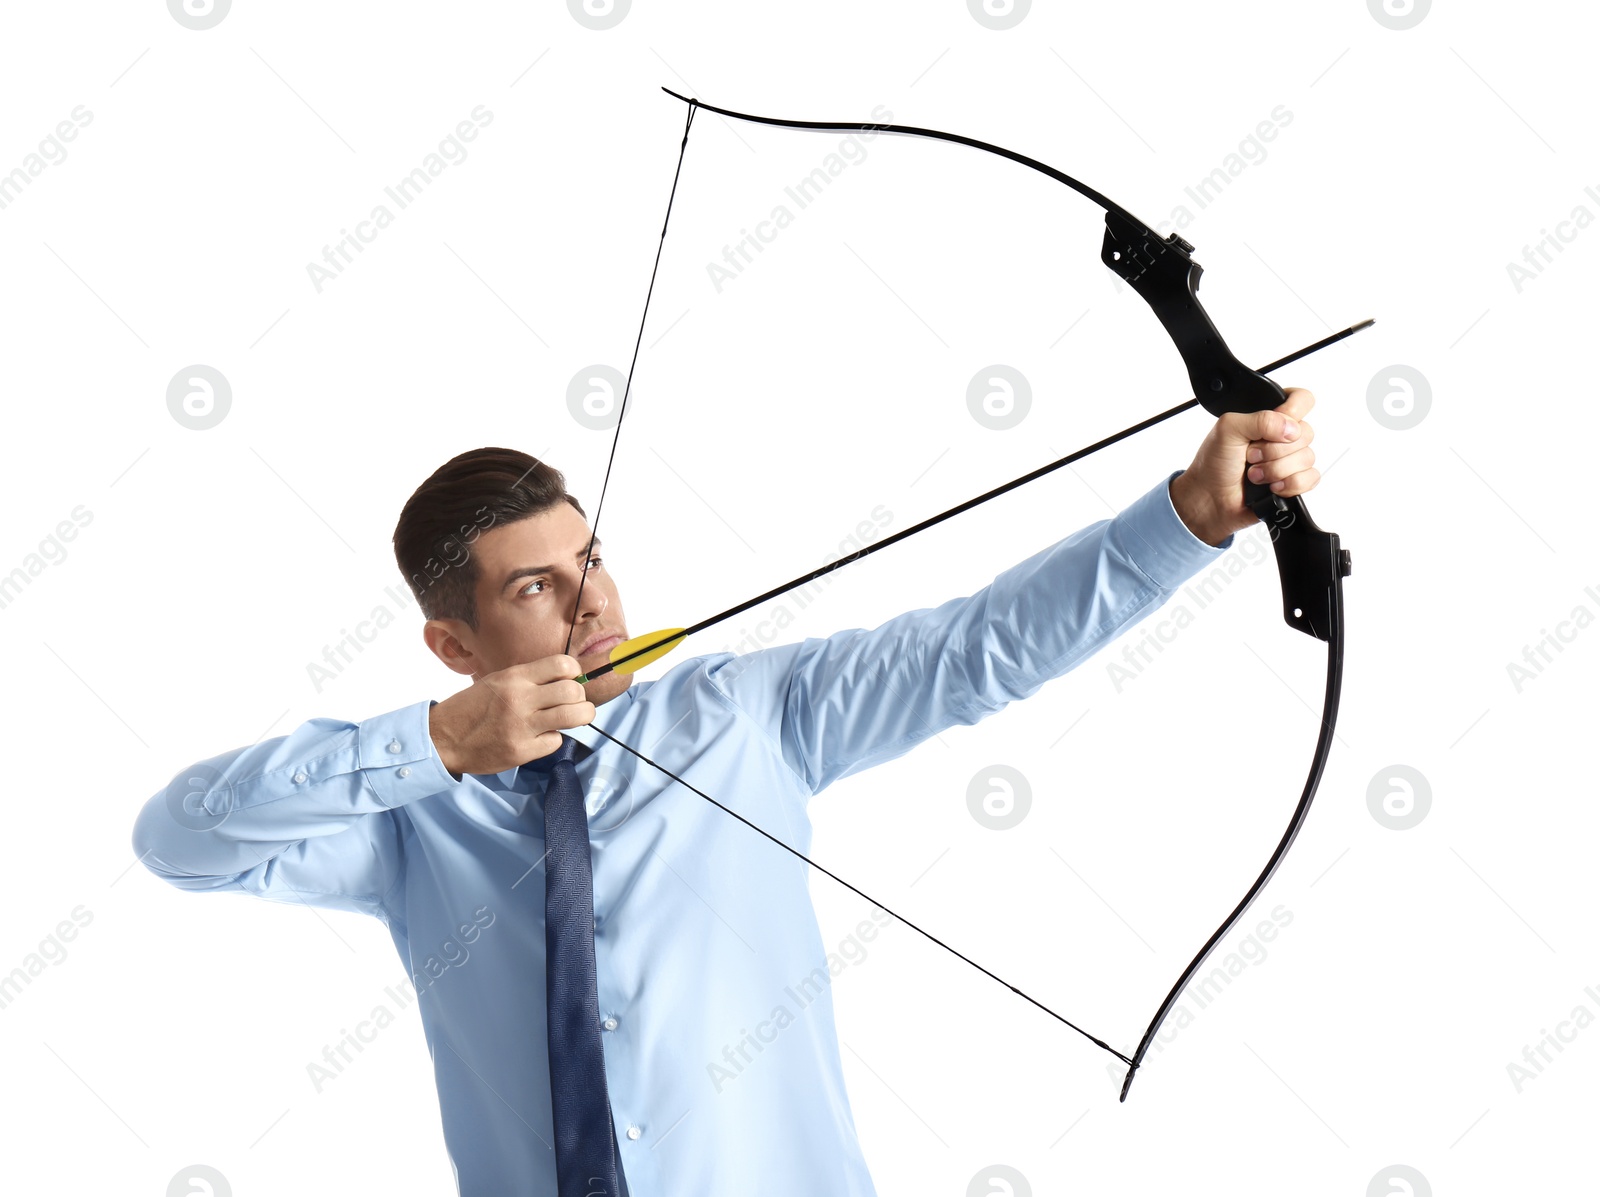 Photo of Businessman with bow and arrow practicing archery on white background